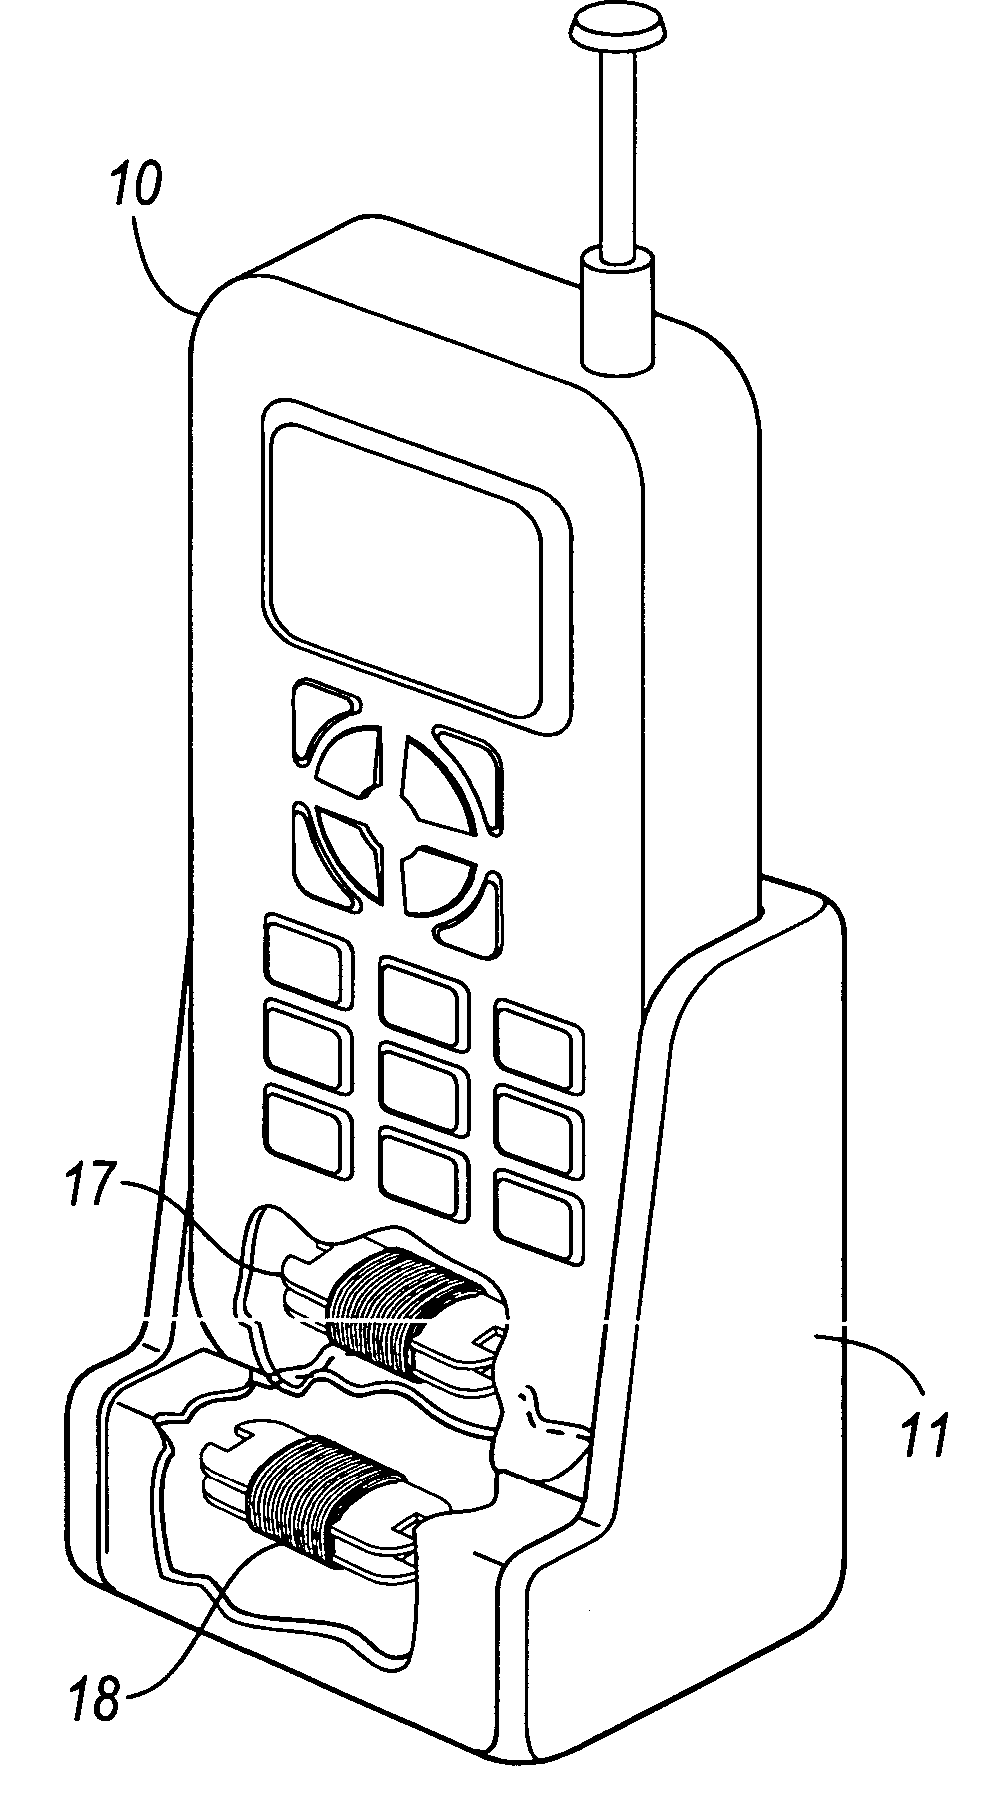 Apparatus for inductively recharging batteries of a portable convenience device